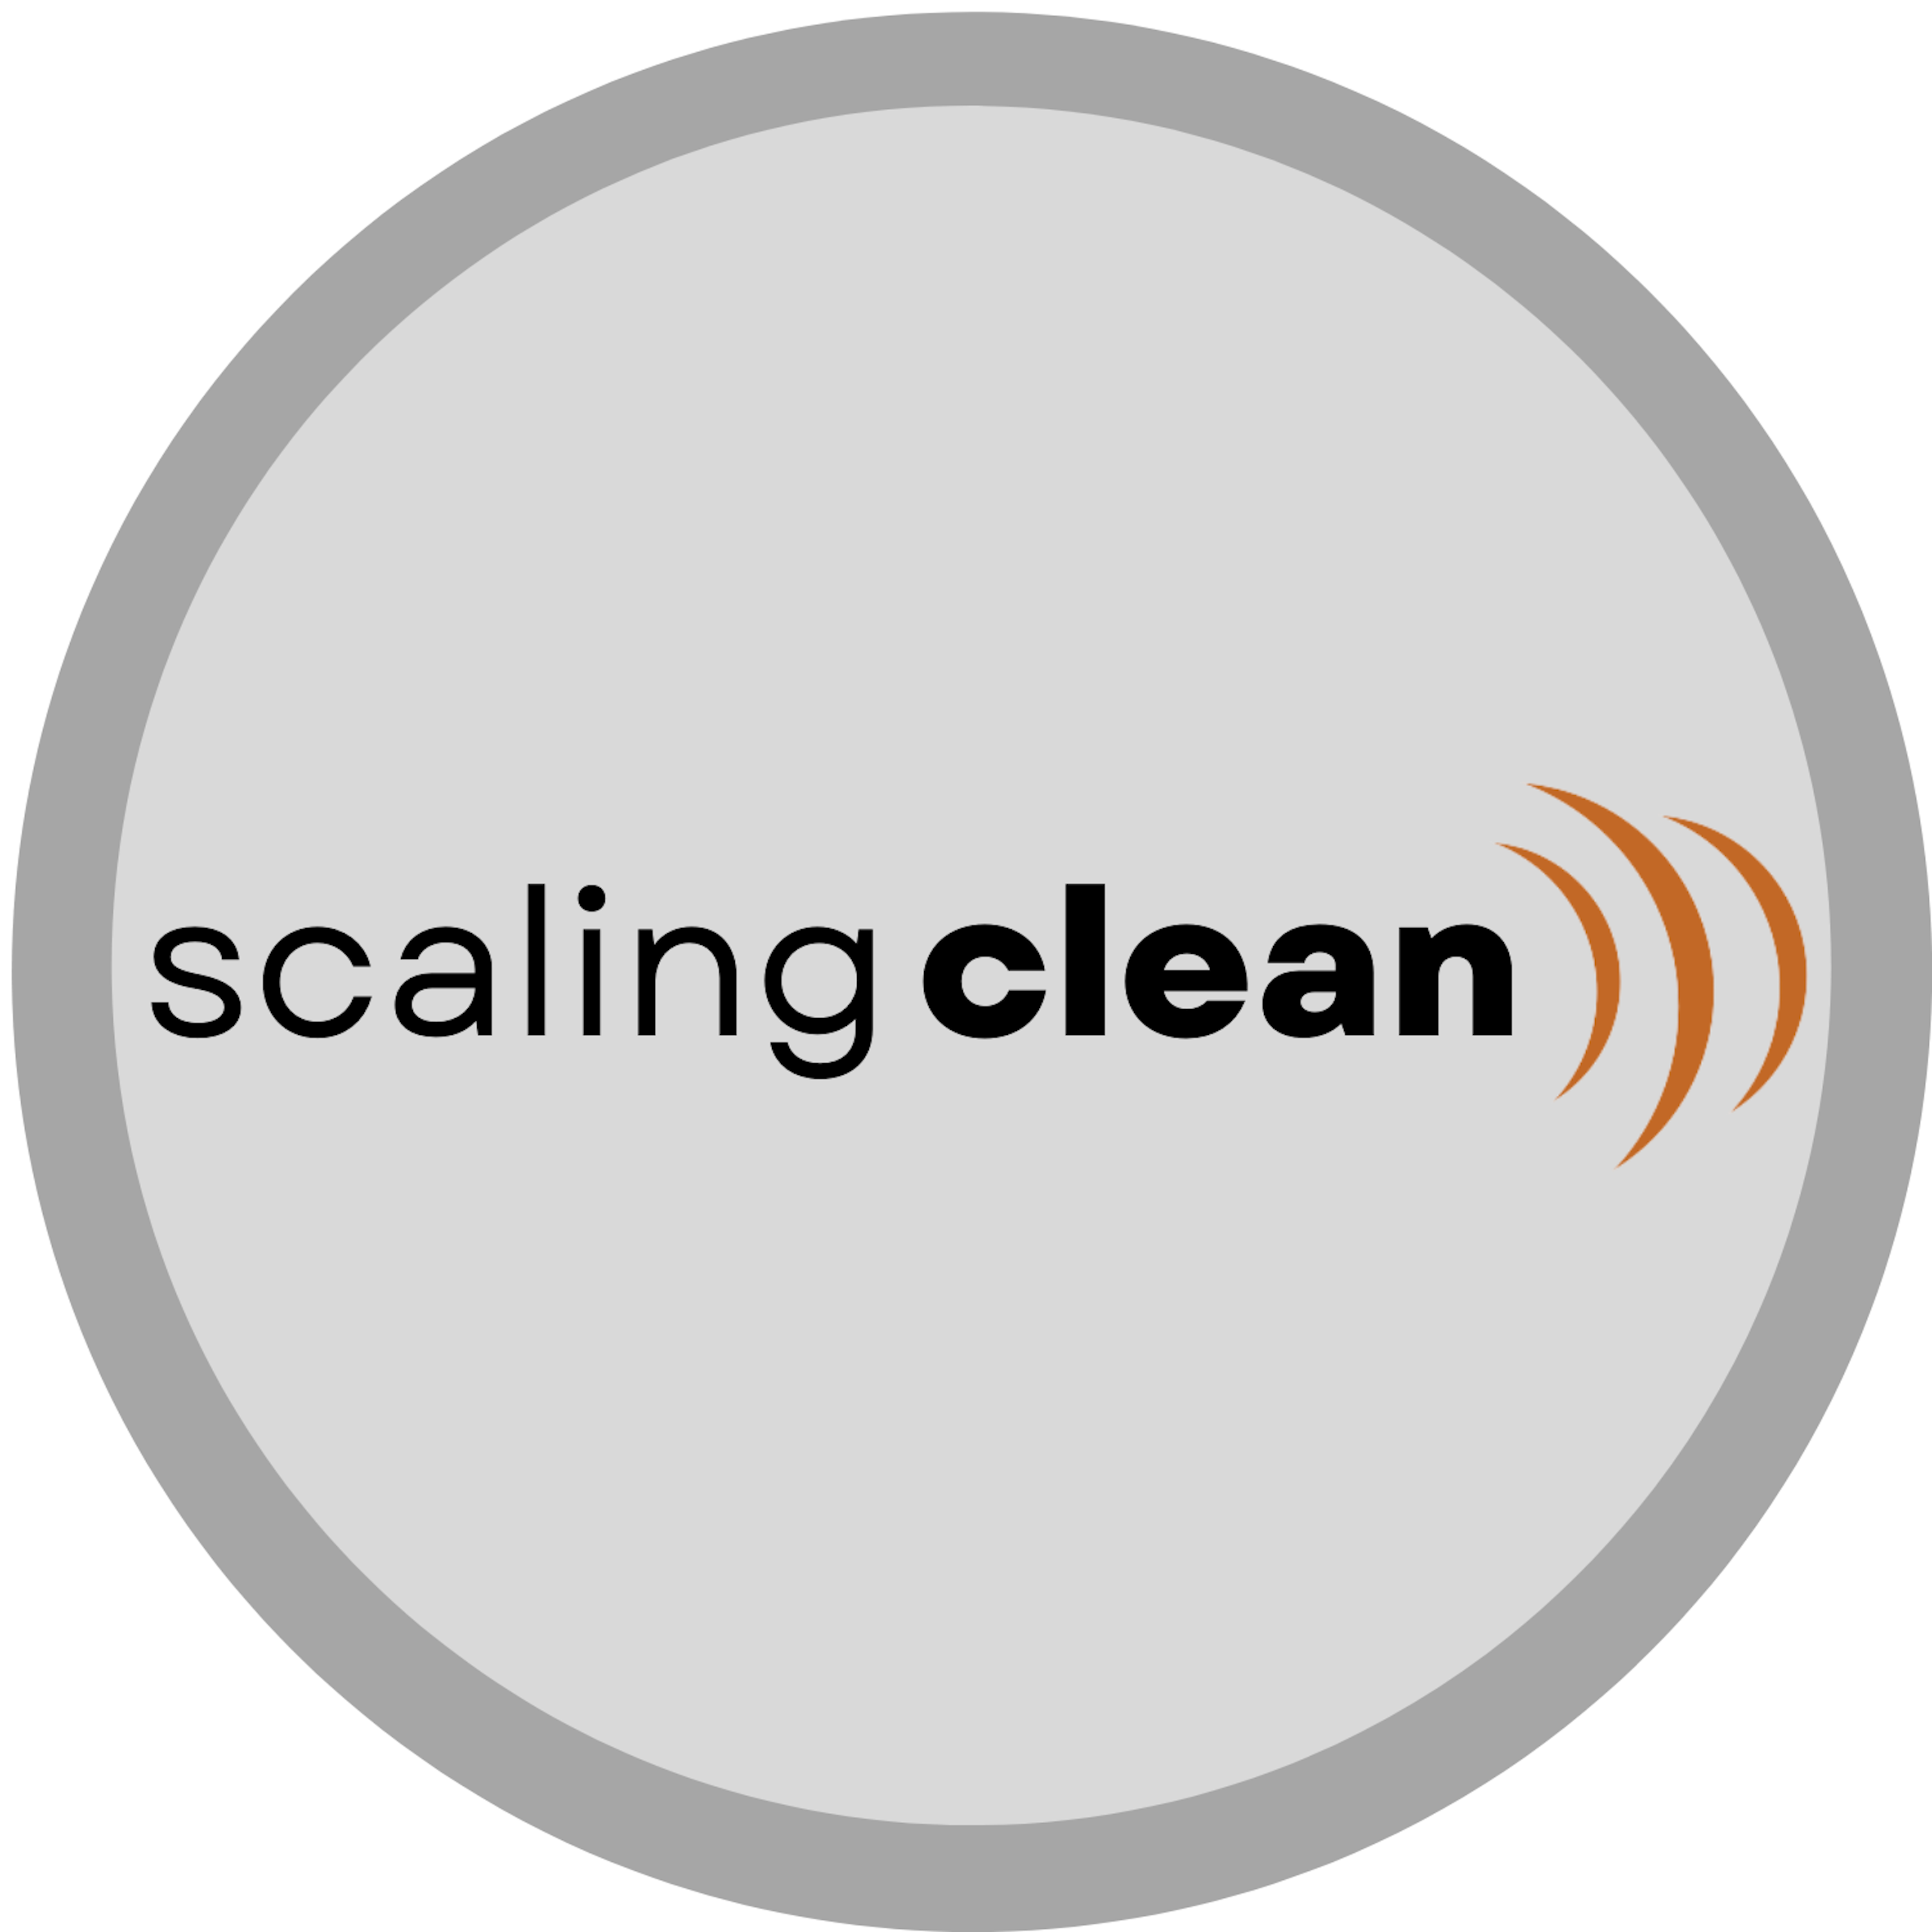 Announcing The Scaling Clean Podcast